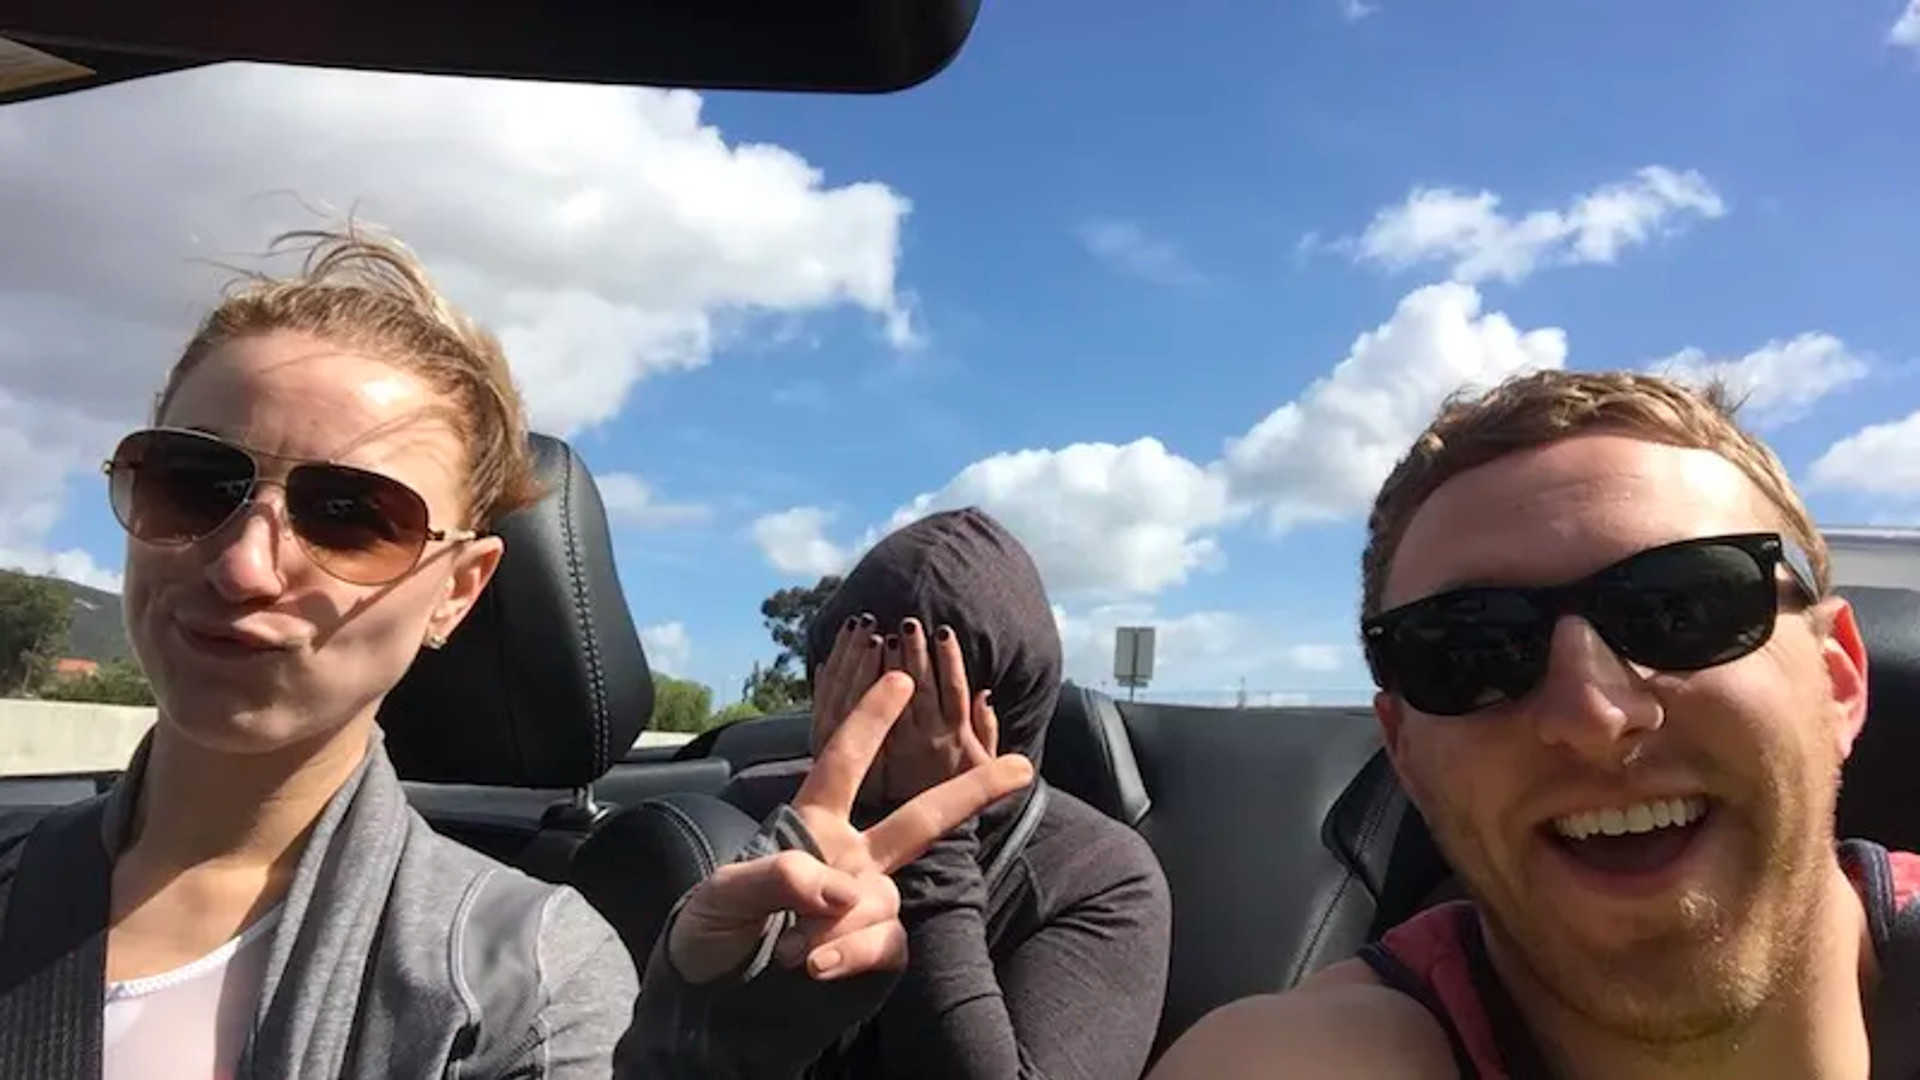 Convertible Life! (Pro tip: Don't forget sunblock while driving)